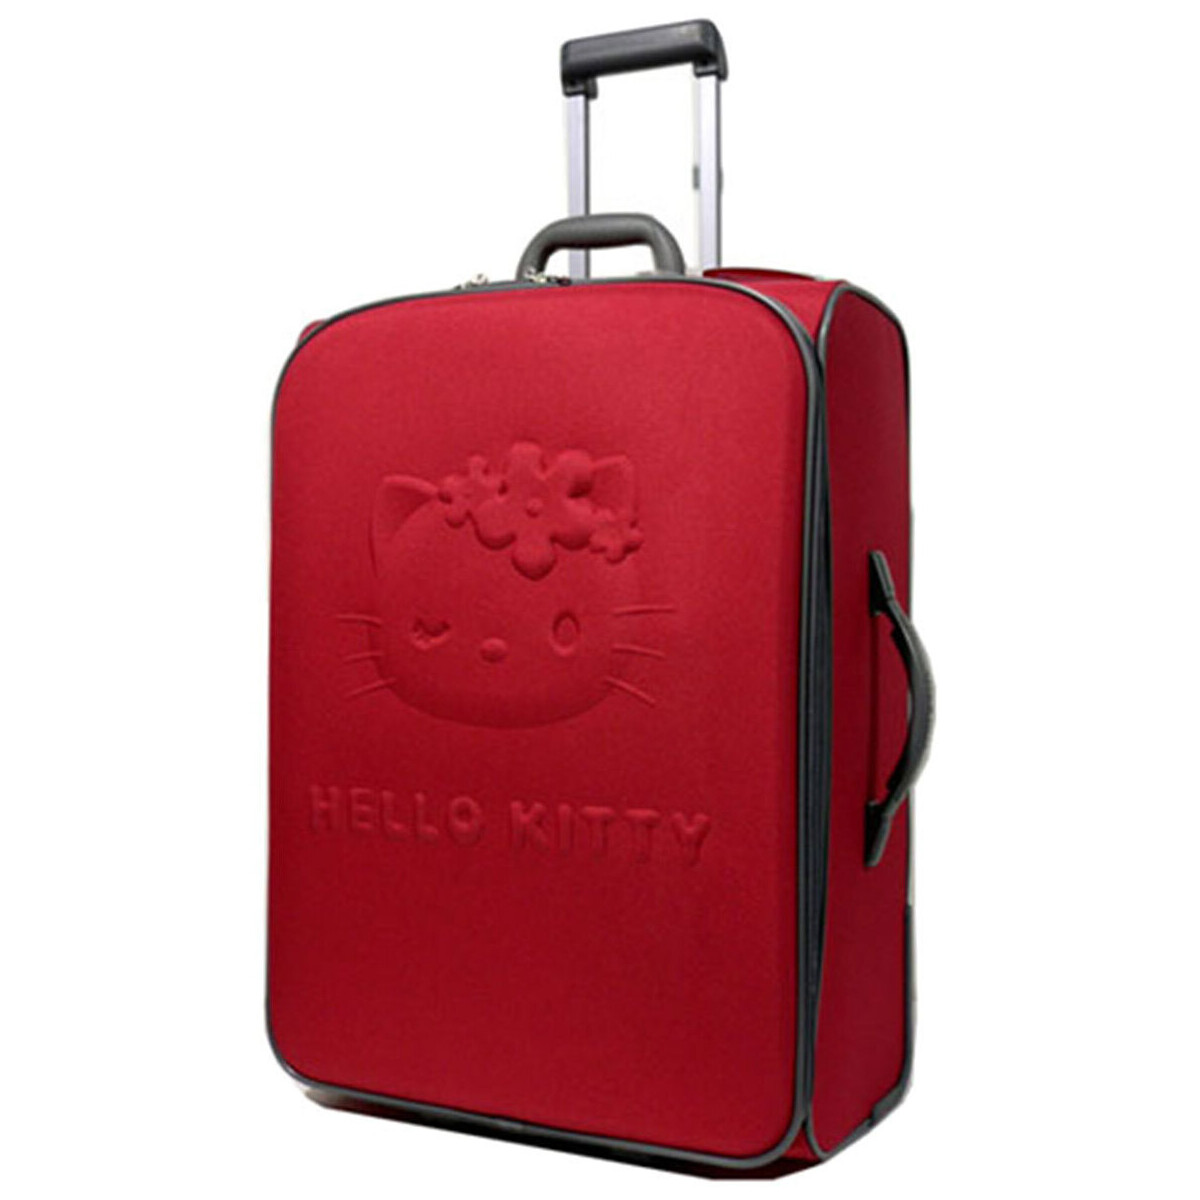 Sacs Valises Rigides Camomilla Grande valise rouge Hello Kitty by Rouge